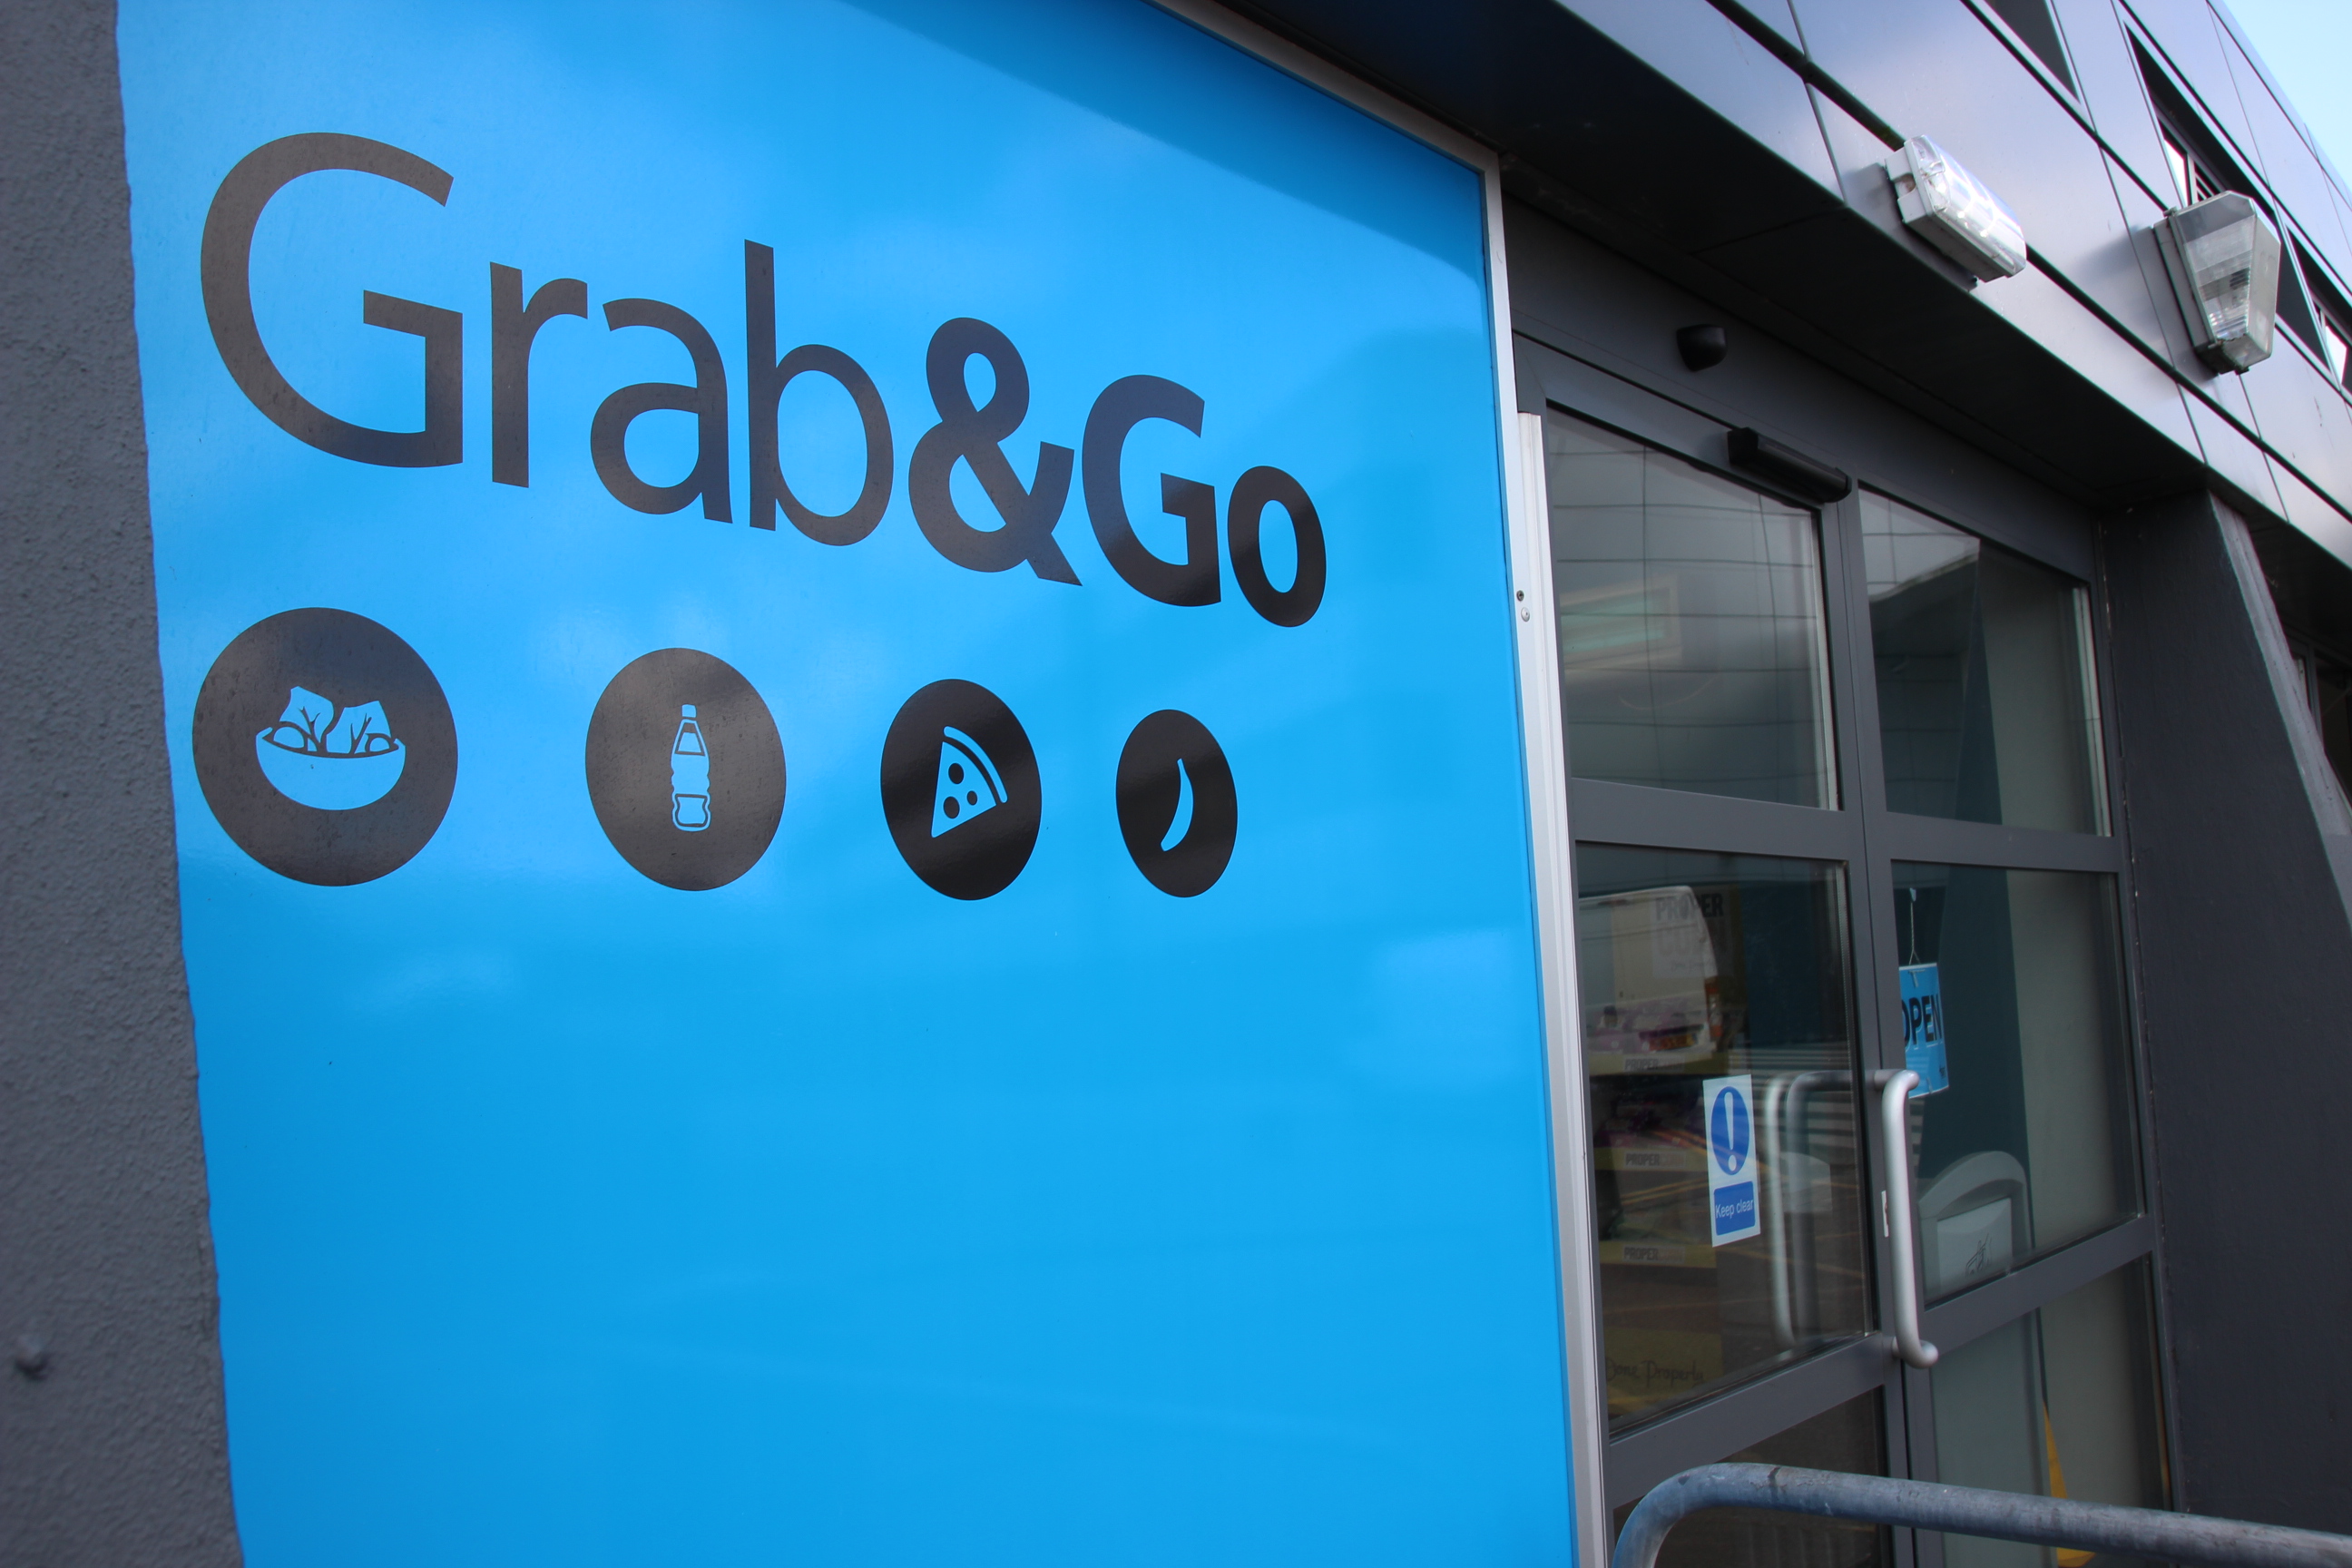 Images showing Grab and Go name and infographics on a blue background